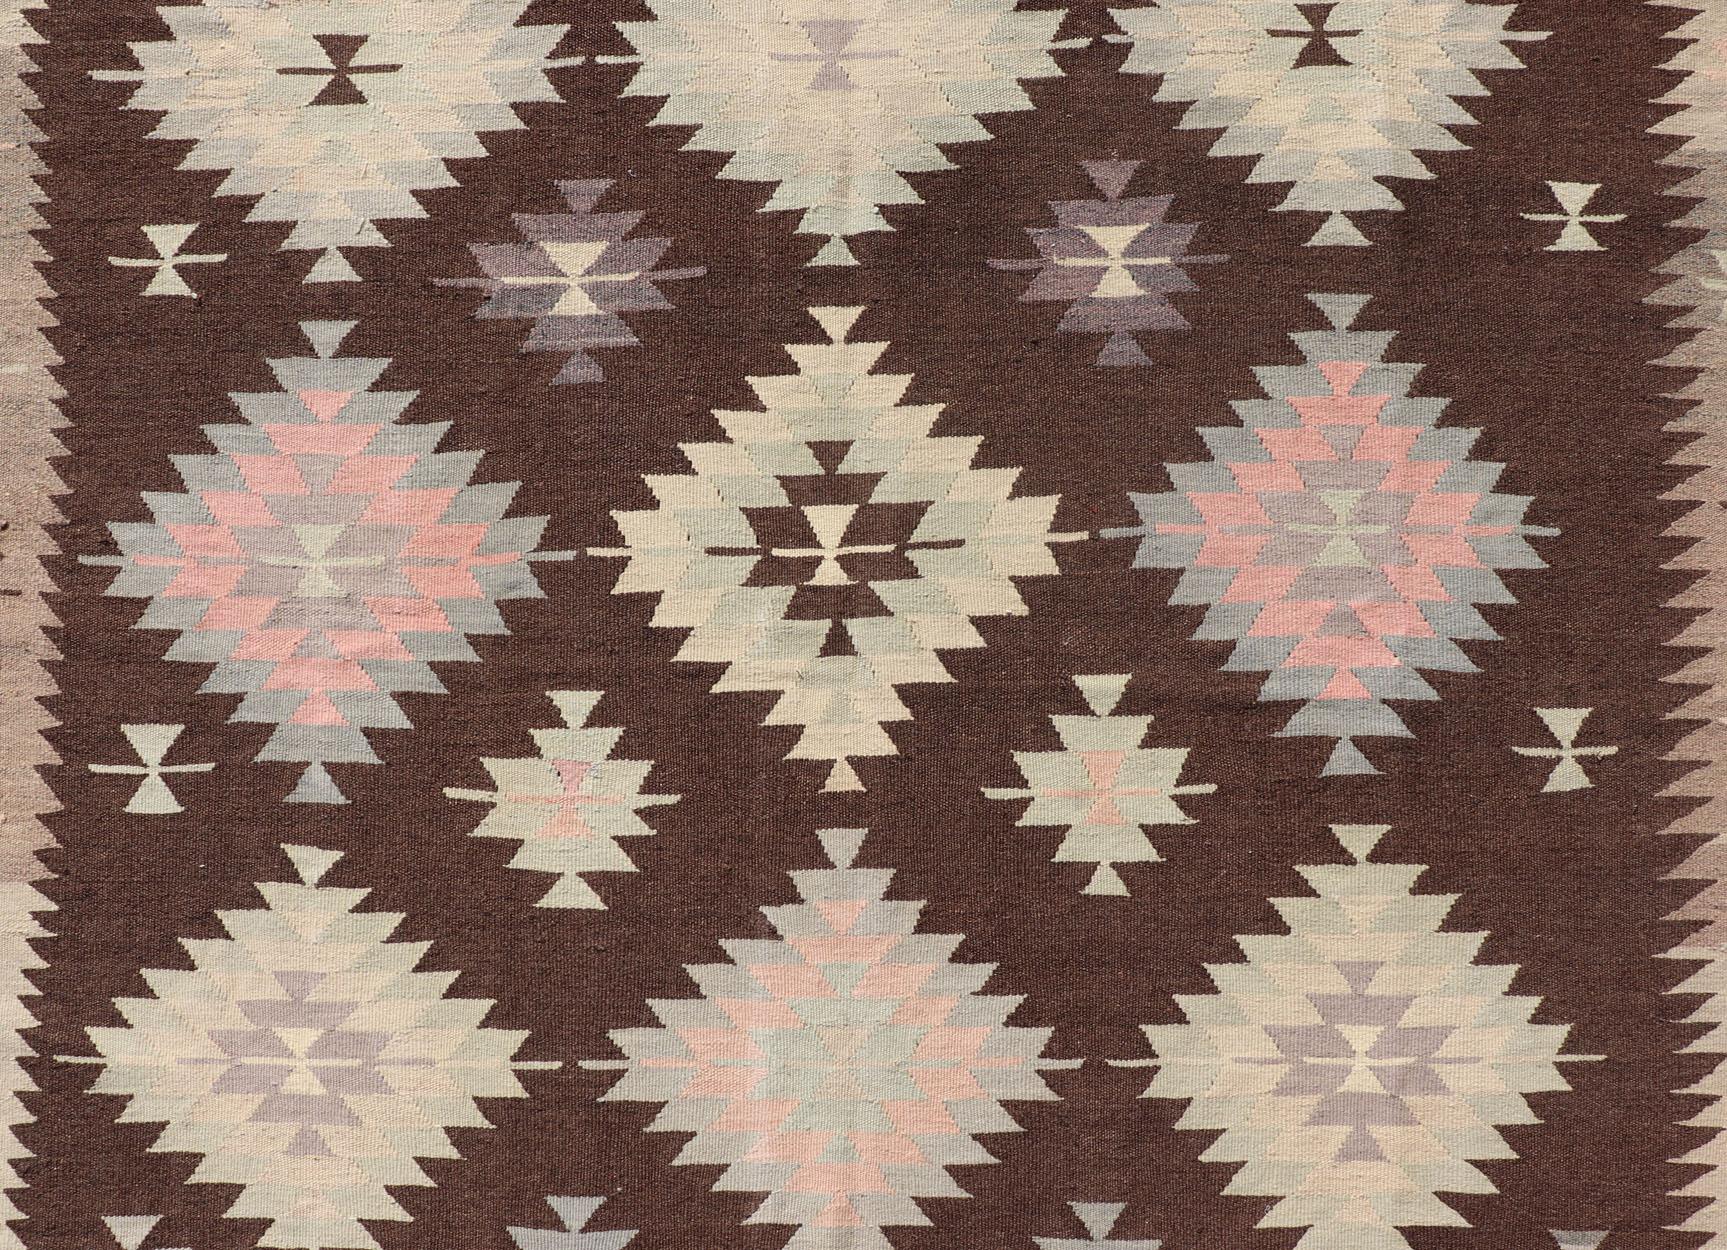 Tribal and Geometrics Turkish Kilim in Brown with Cream, Pink, Light Gray/Blue For Sale 4